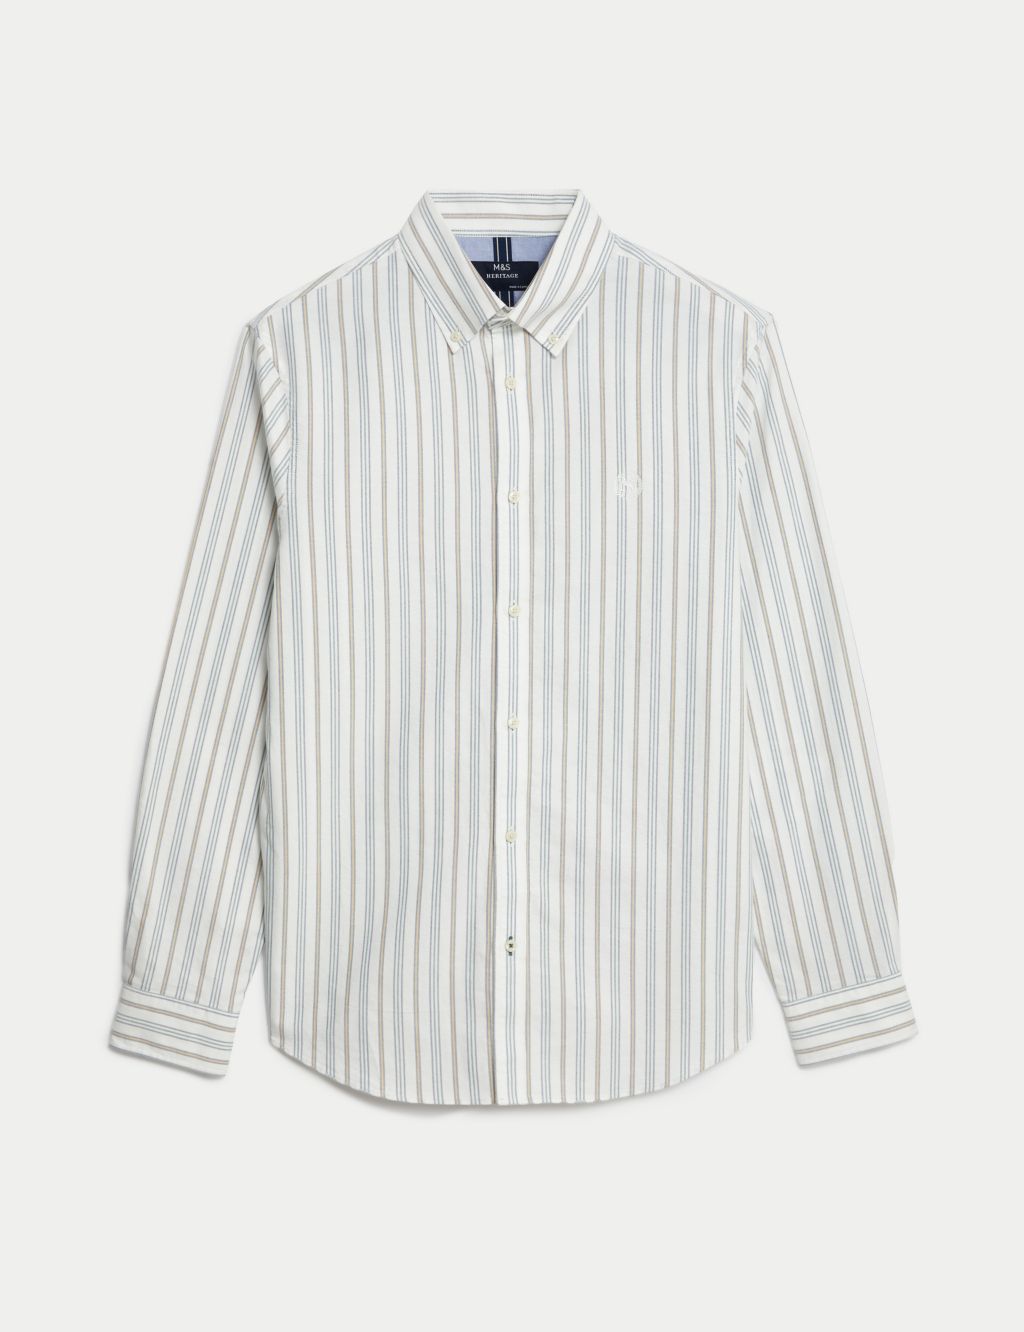 Easy Iron Pure Cotton Striped Oxford Shirt image 2